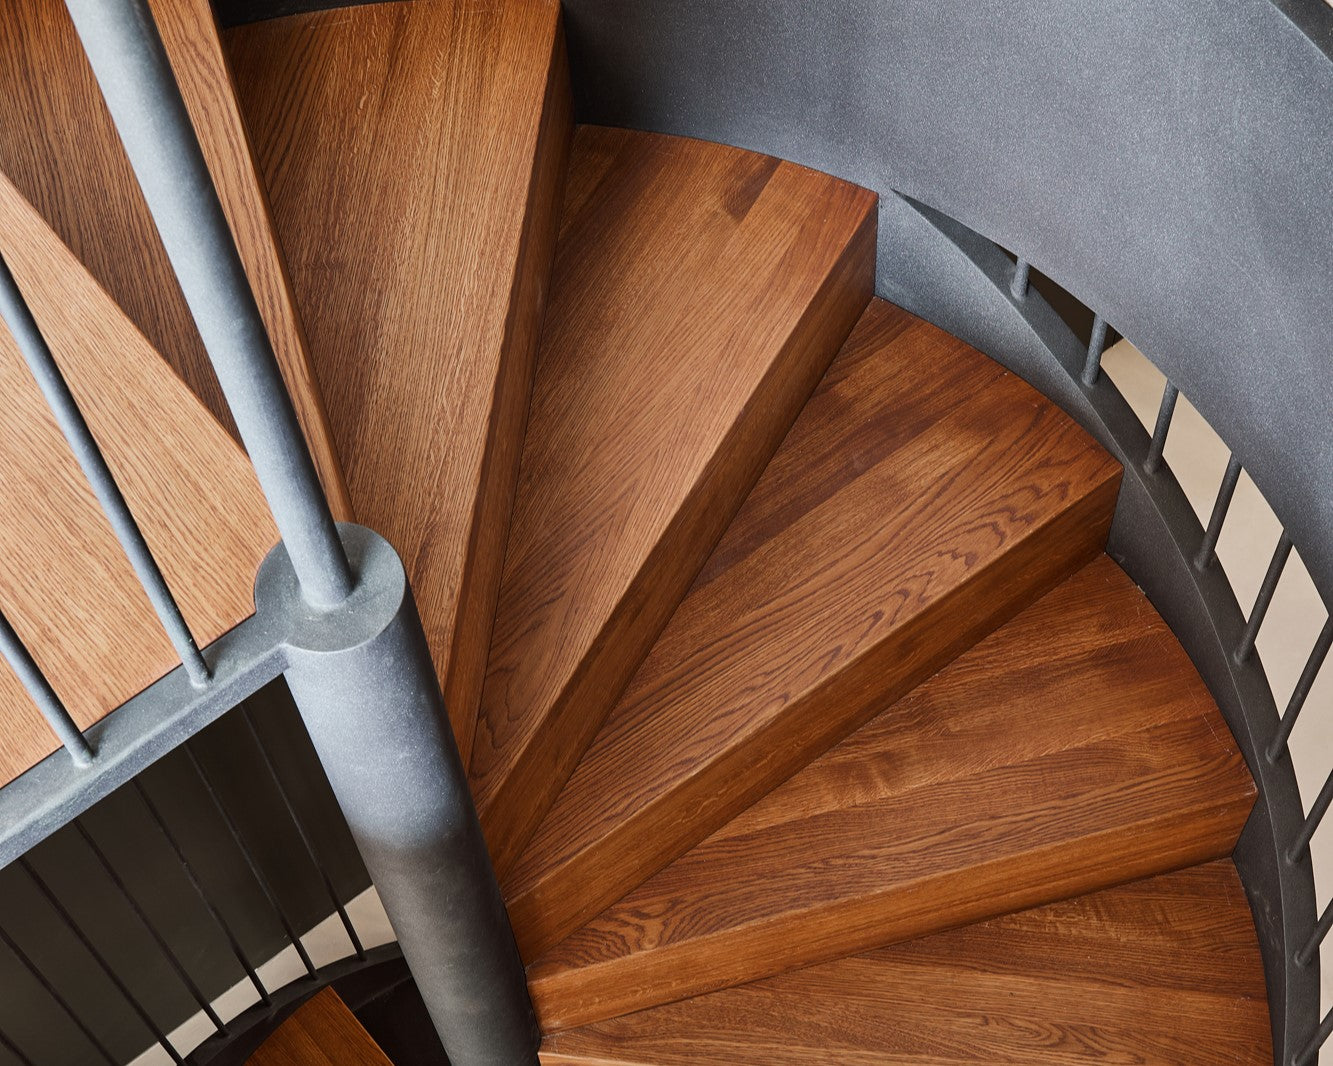 A spiral staircase made from European oak wood finished with Rubio Monocoat Oil Plus 2C hardwax oil wood finish offering increased protection for wooden floors.